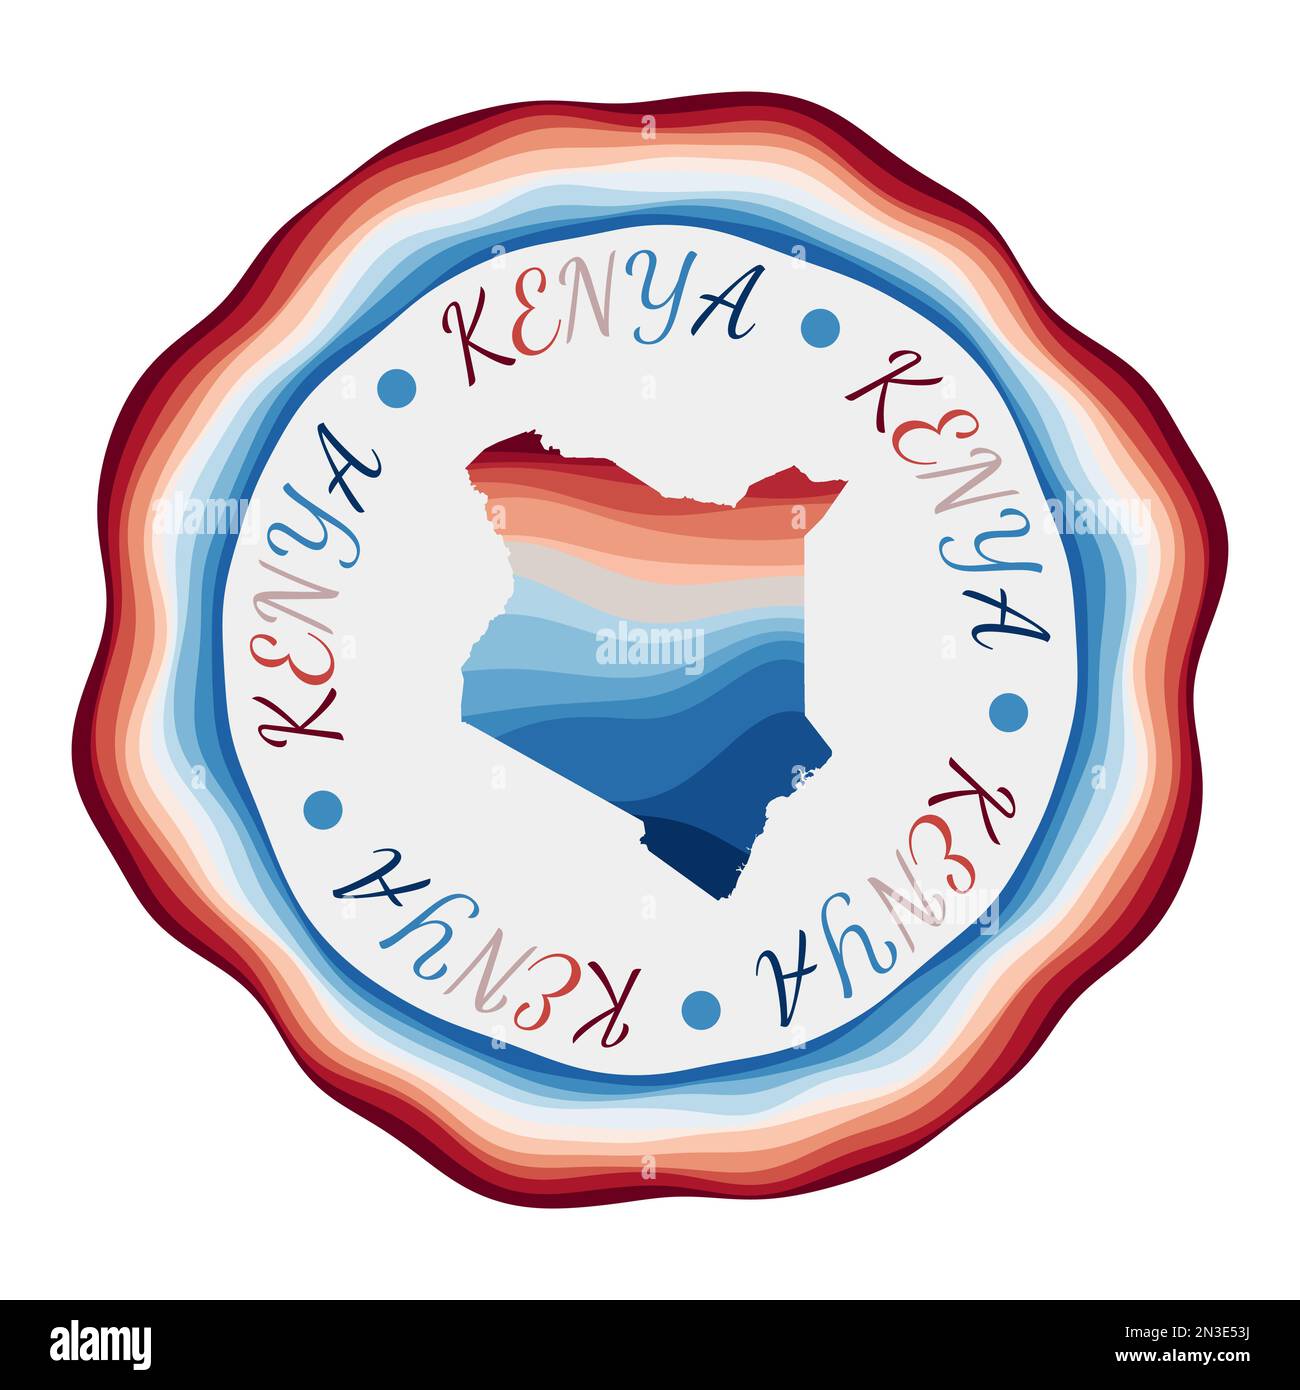 Kenya badge. Map of the country with beautiful geometric waves and vibrant red blue frame. Vivid round Kenya logo. Vector illustration. Stock Vector